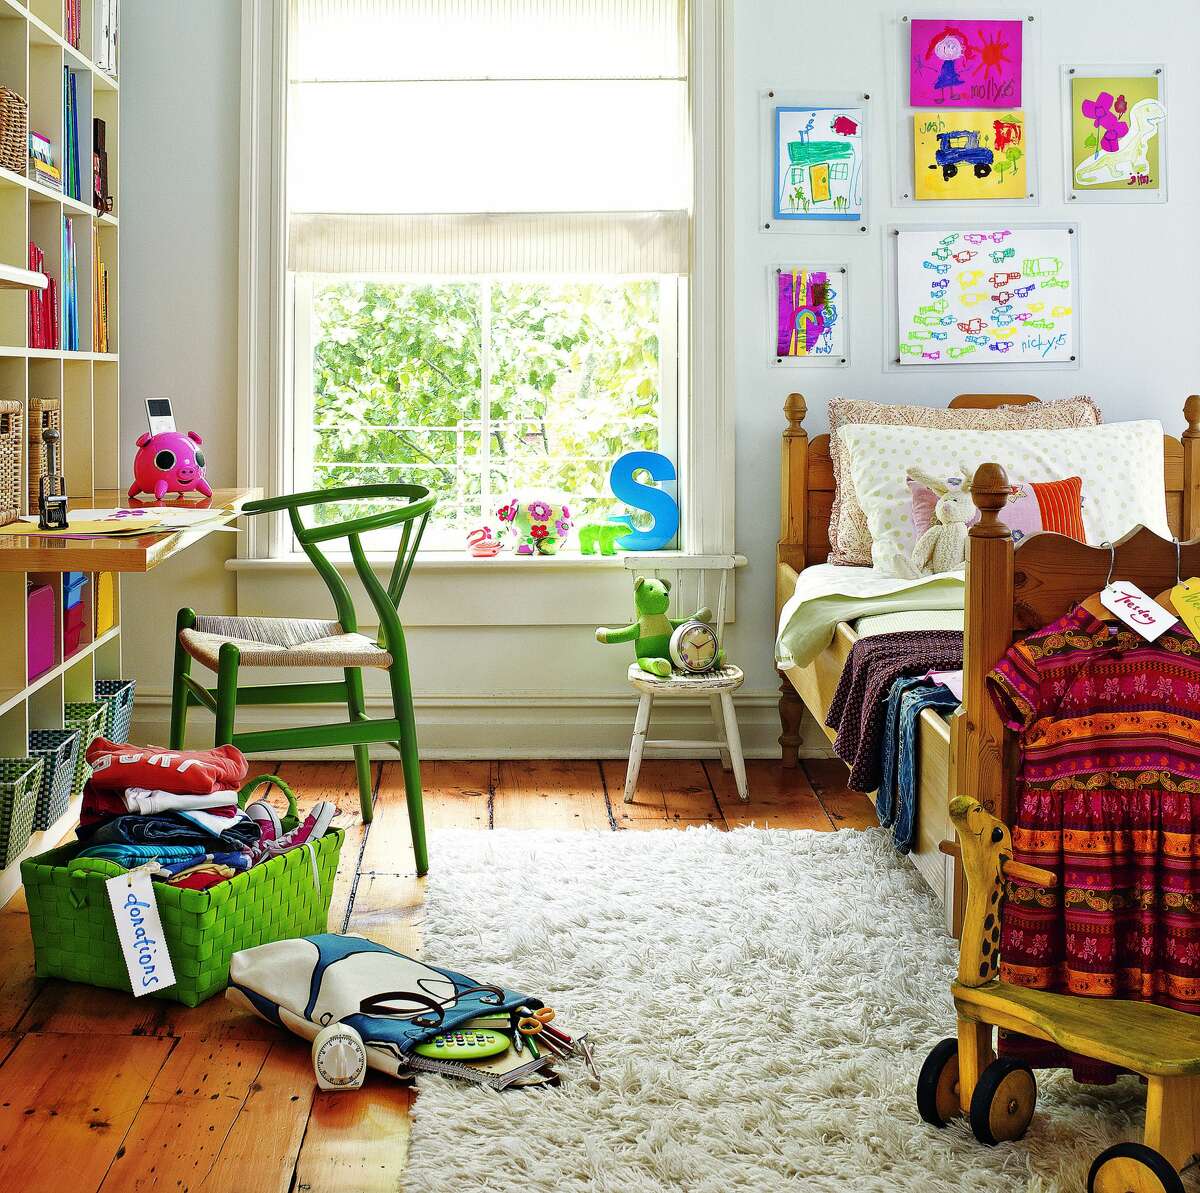 A wall of storage bins in a child's room teaches your kids the responsibility of picking up after themselves. If getting rid of clutter and having a tidier or more organized home is a goal for 2019, Real Simple's new "The Real Simple Method to Organizing Every Room" book offers plenty of advice.